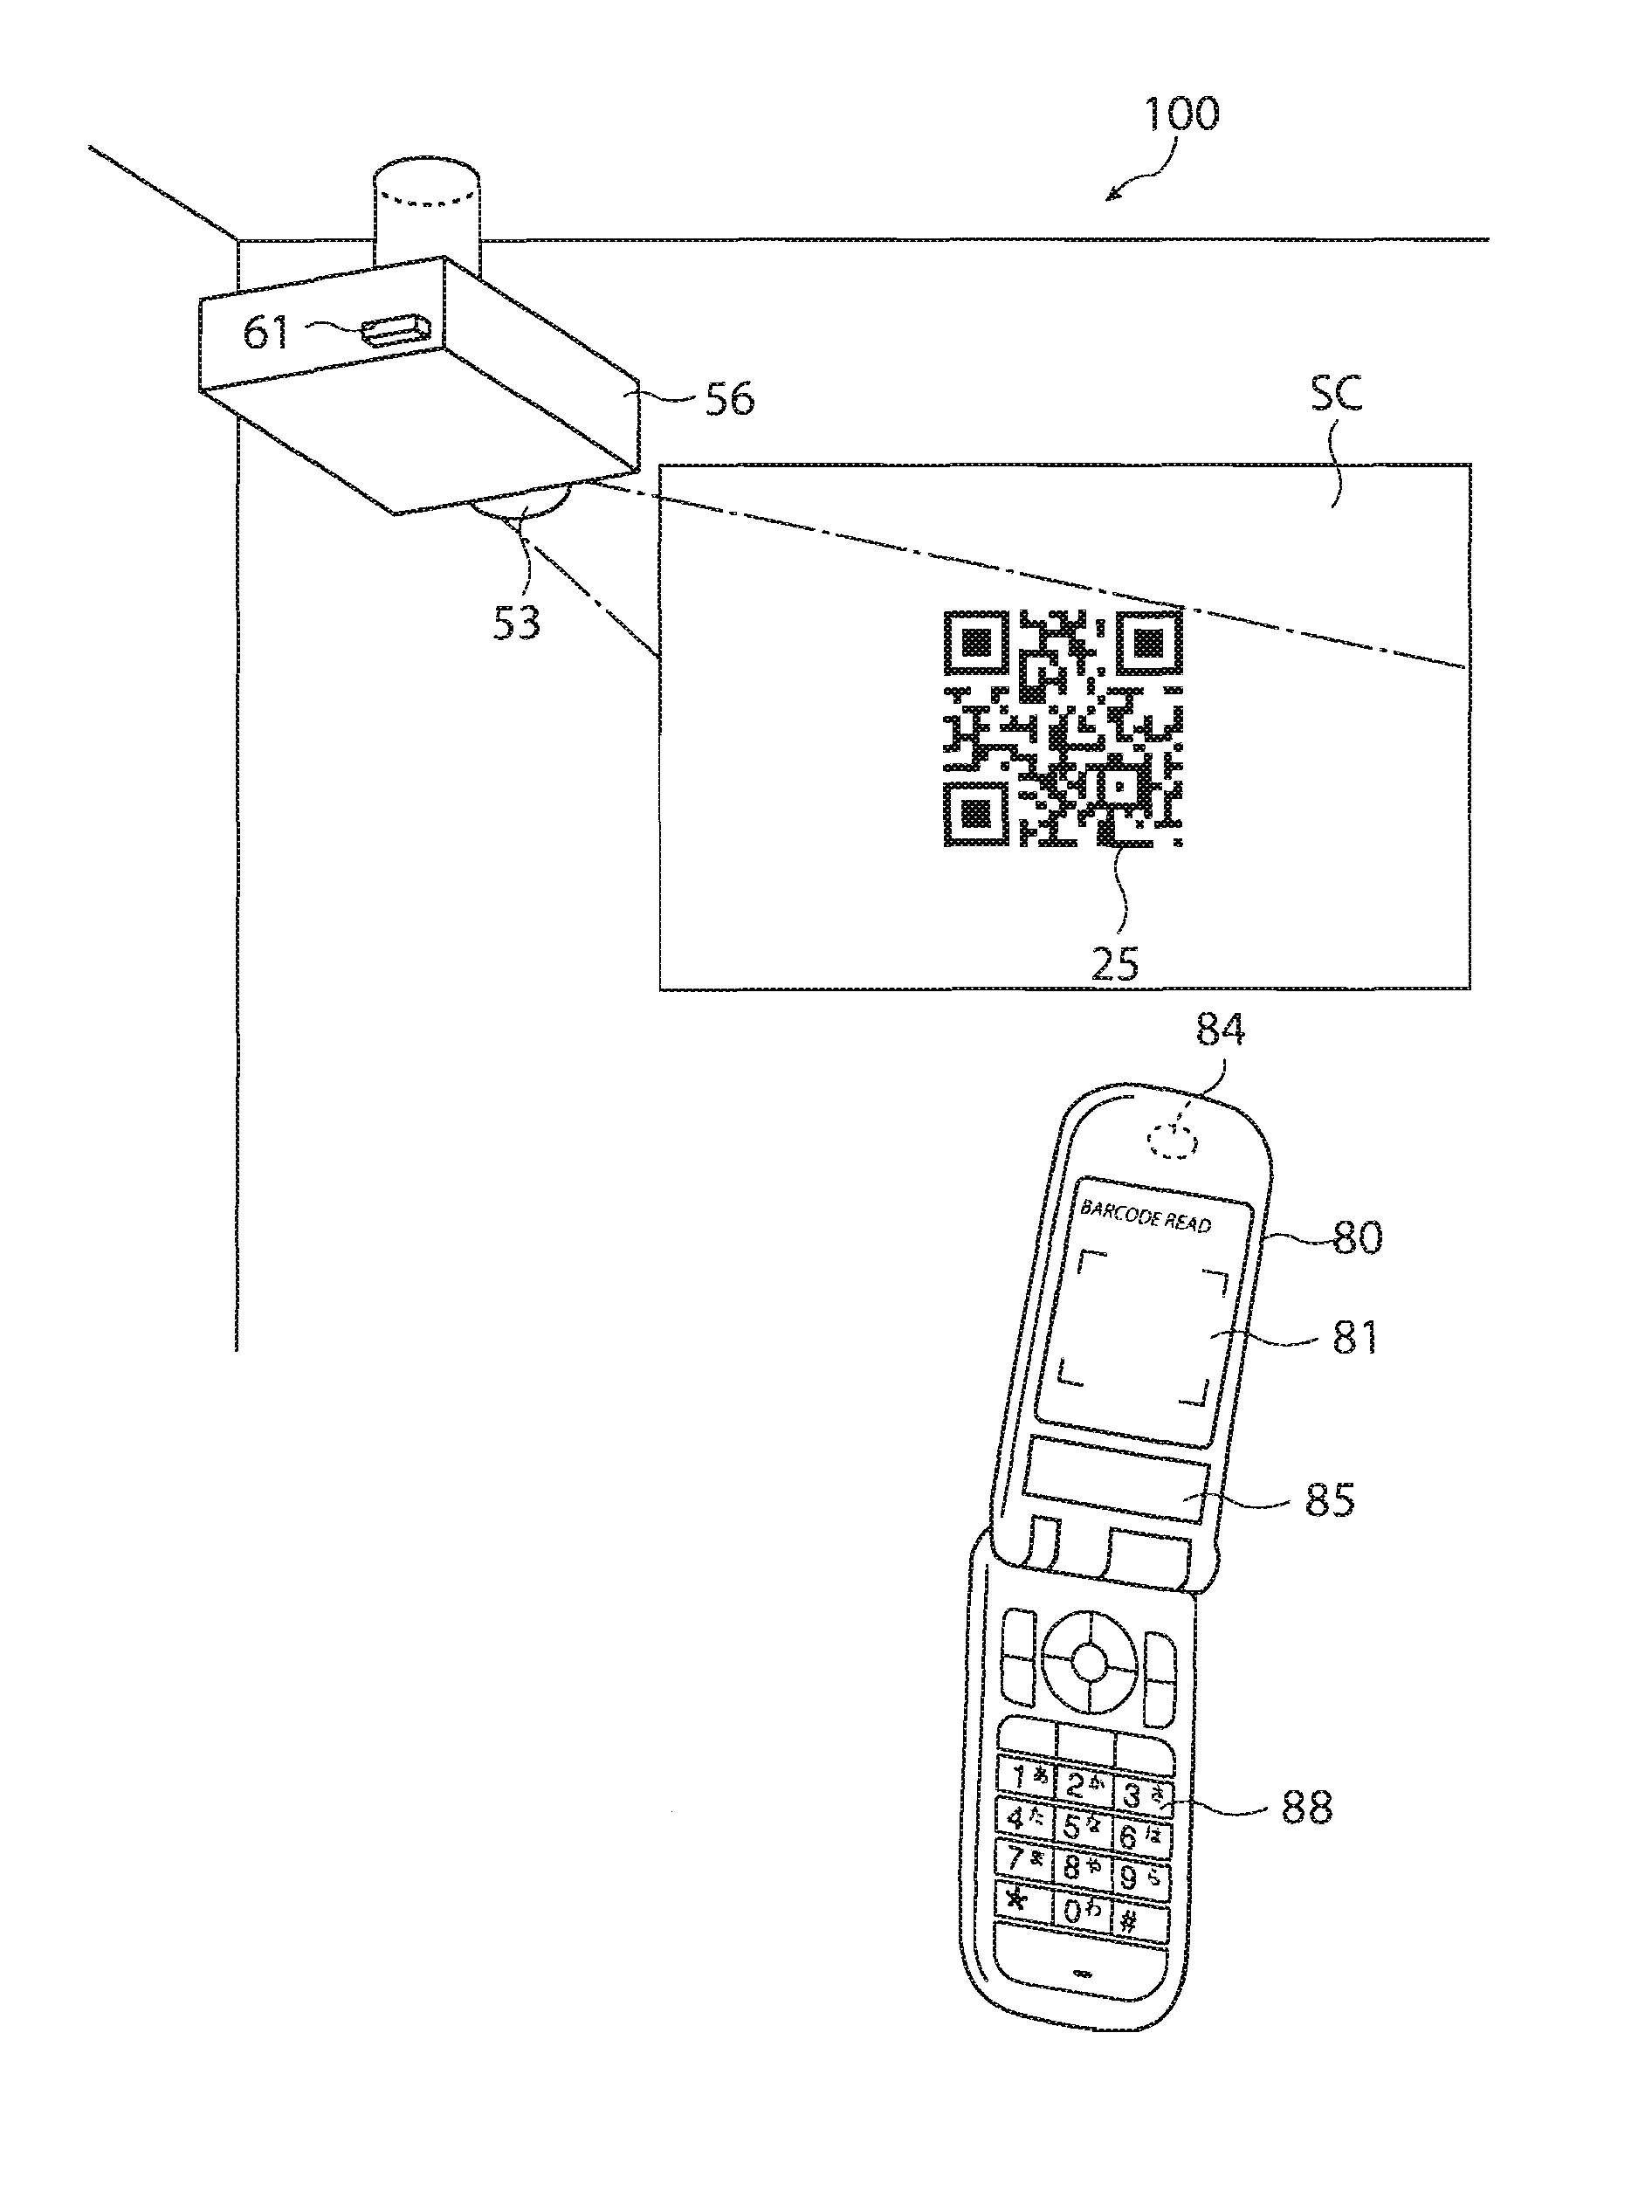 Image display system, image display device of image display system, mobile terminal device, connection establishment method of image display system